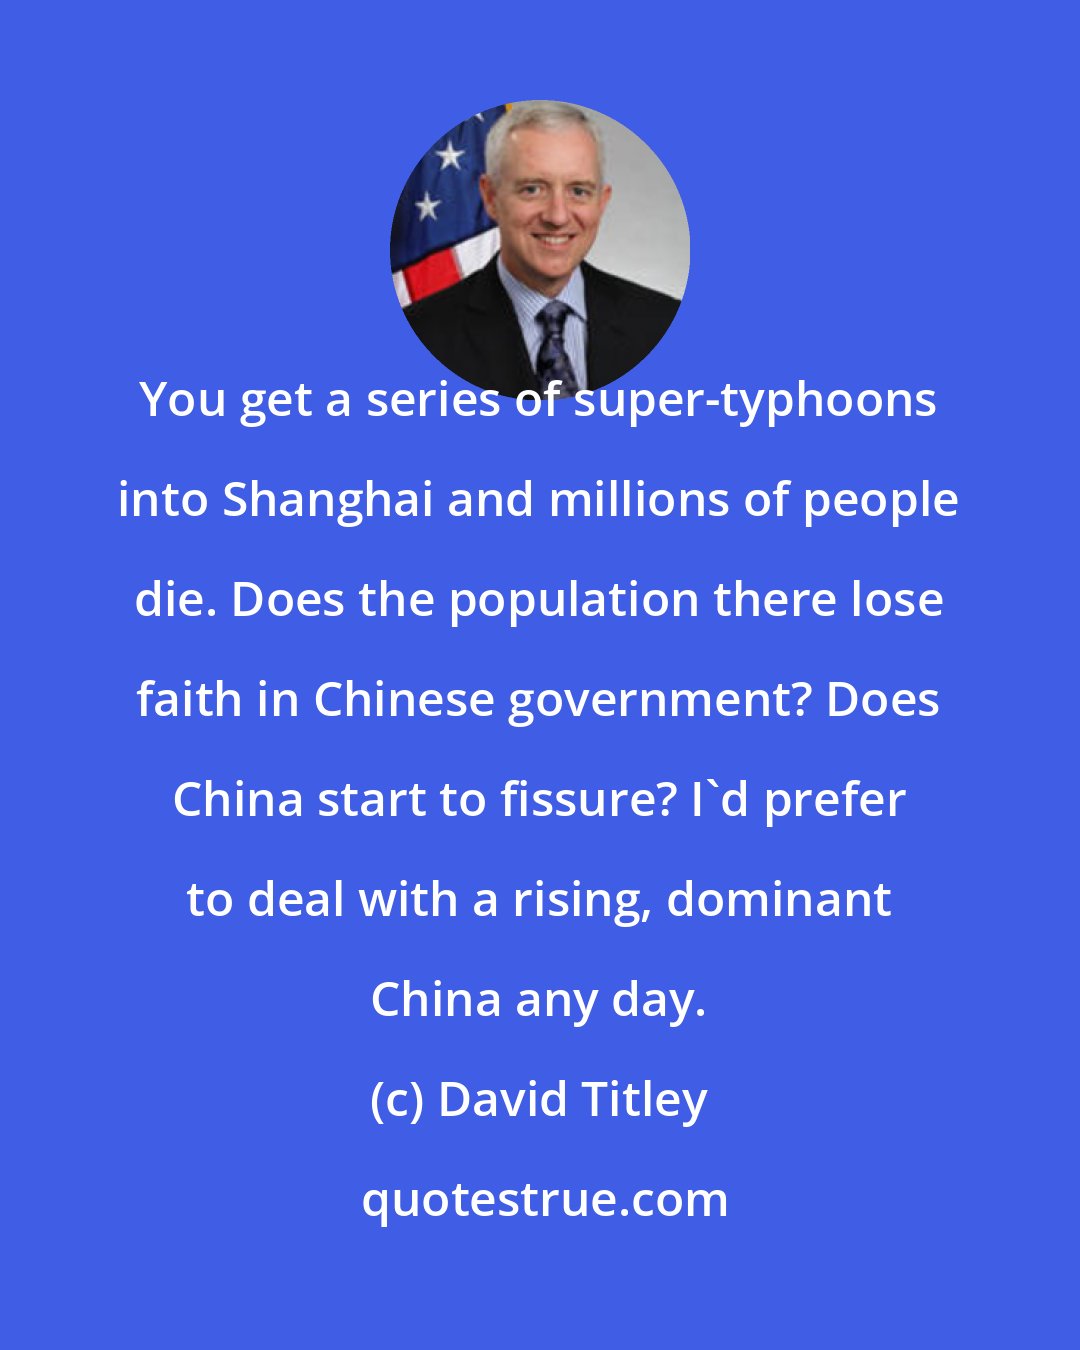 David Titley: You get a series of super-typhoons into Shanghai and millions of people die. Does the population there lose faith in Chinese government? Does China start to fissure? I'd prefer to deal with a rising, dominant China any day.